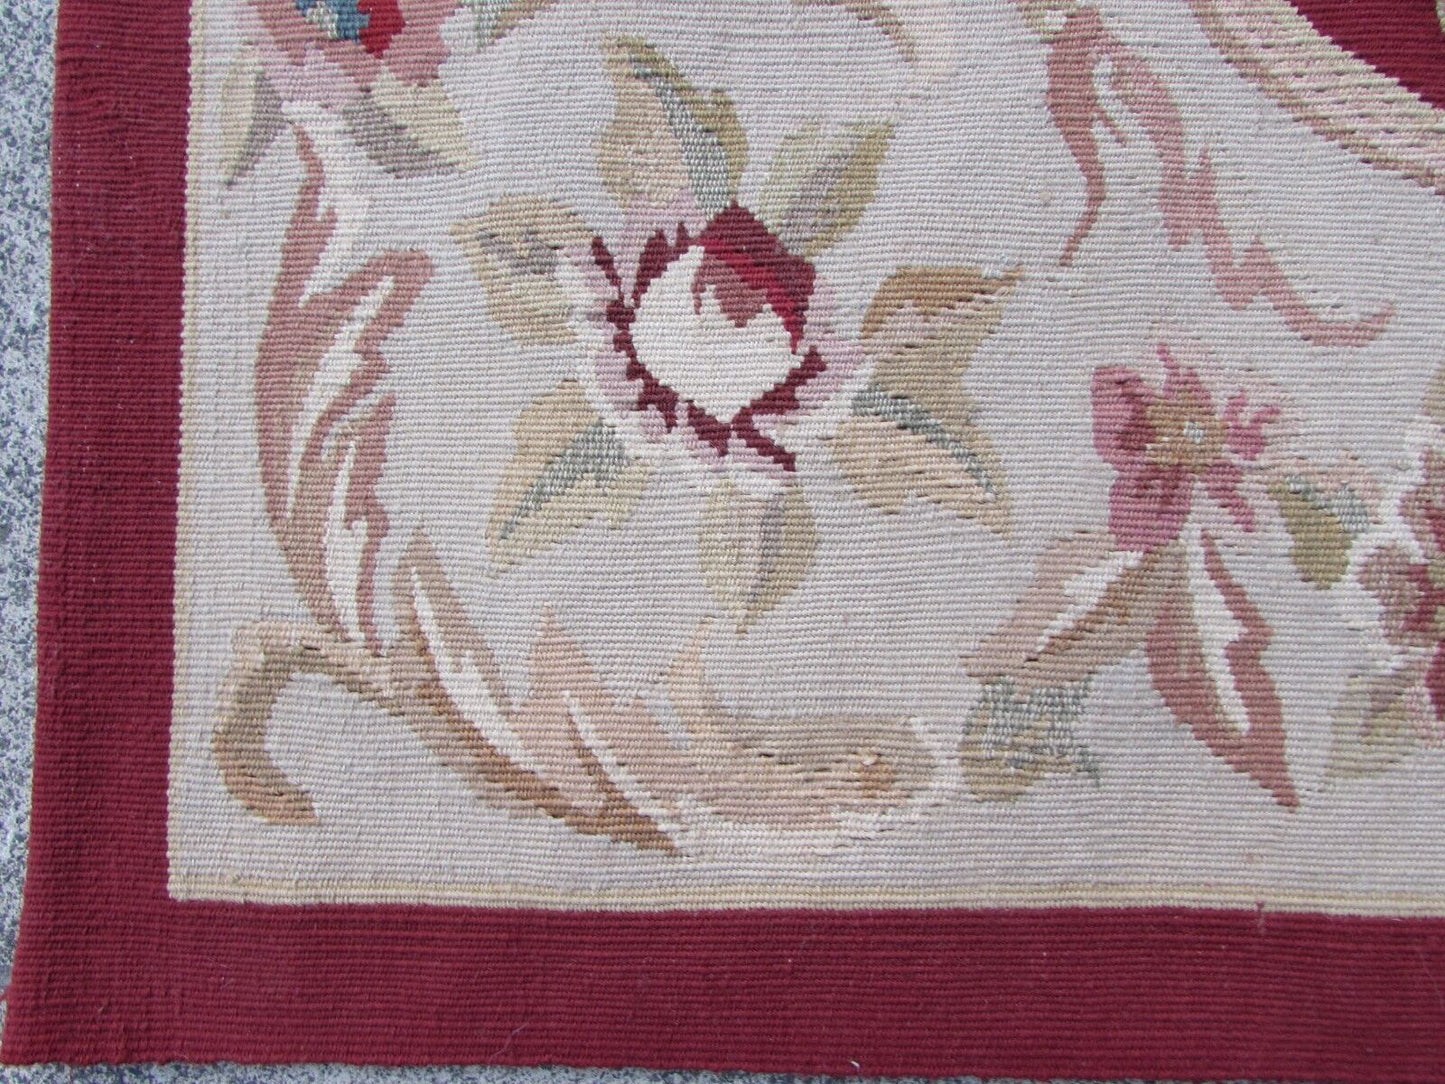 Handmade vintage French Aubusson rug in traditional design and in red and beige colors. The rug is from the end of 20th century in original good condition.